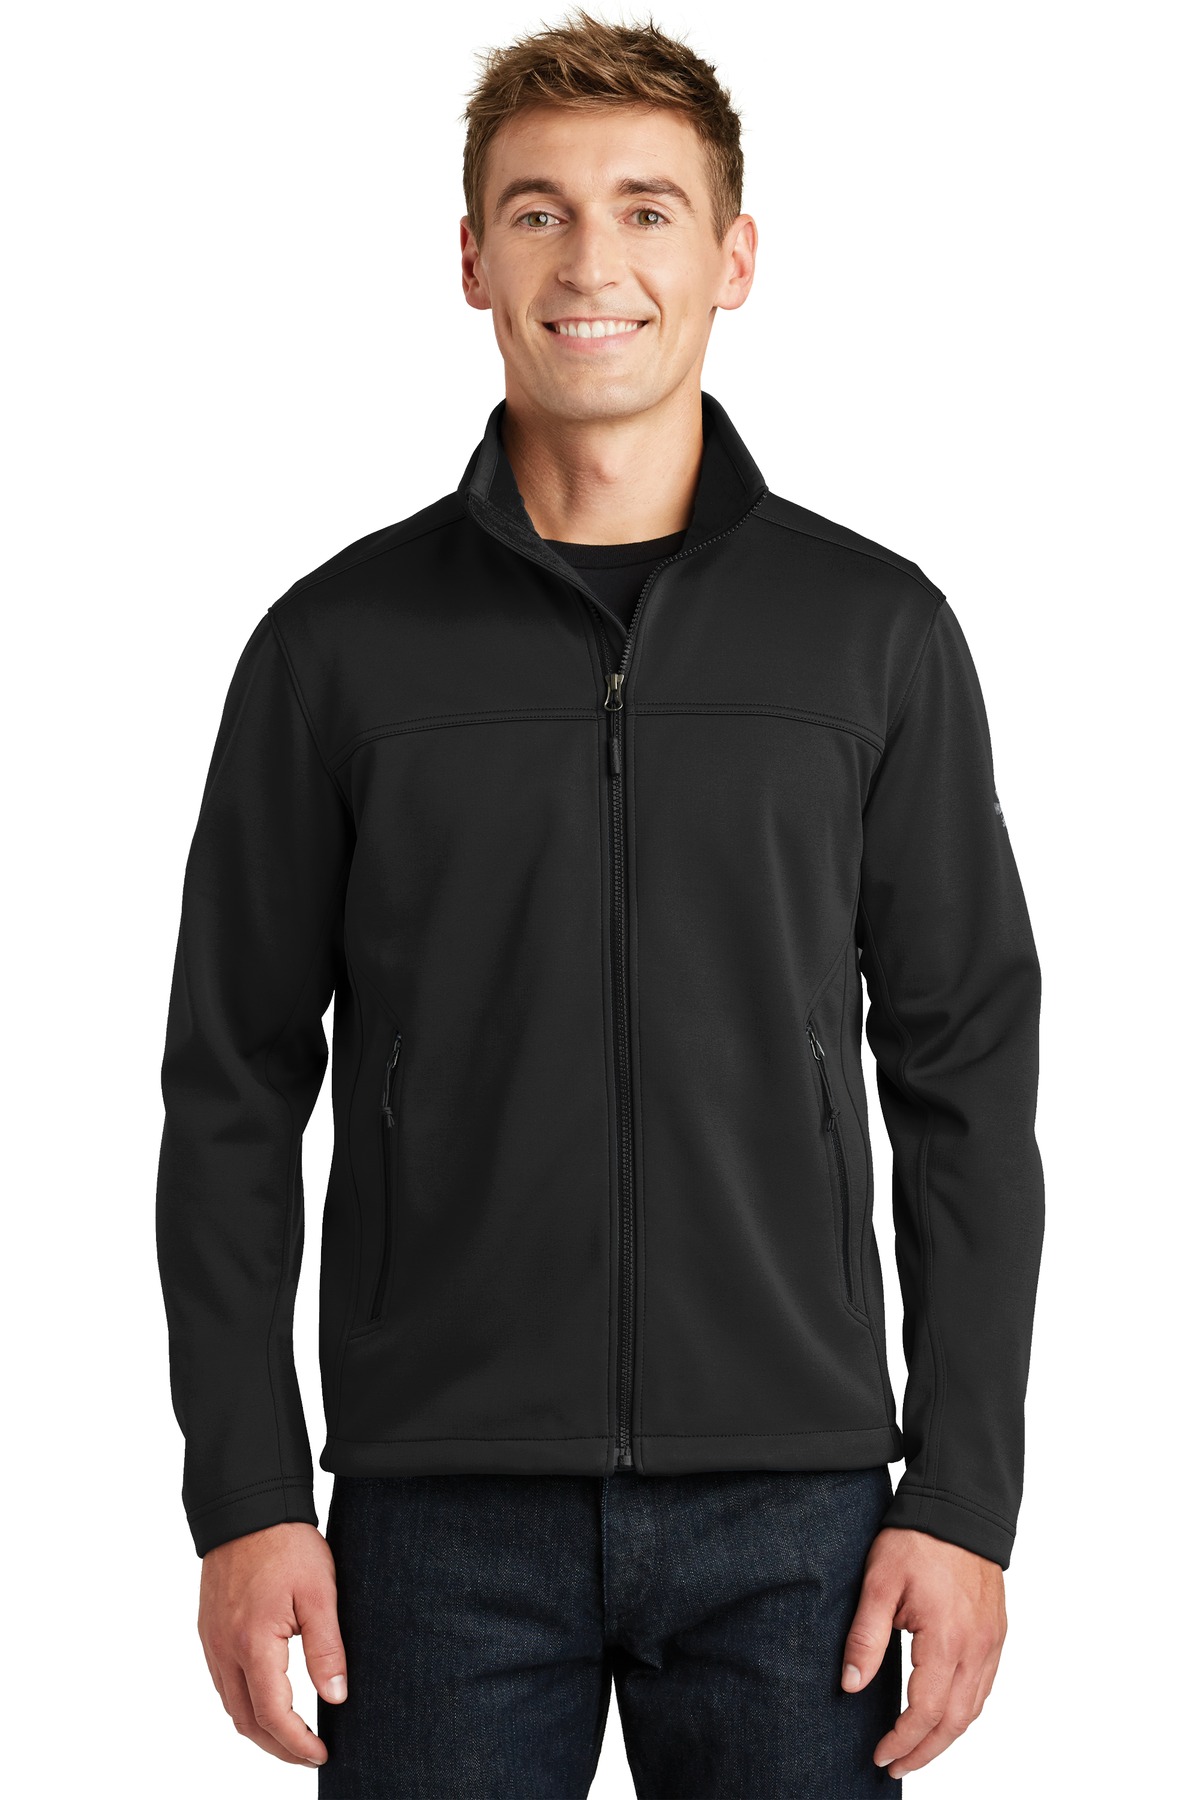 Buy The North Face Ridgewall Soft Shell Jacket - The North Face Online ...